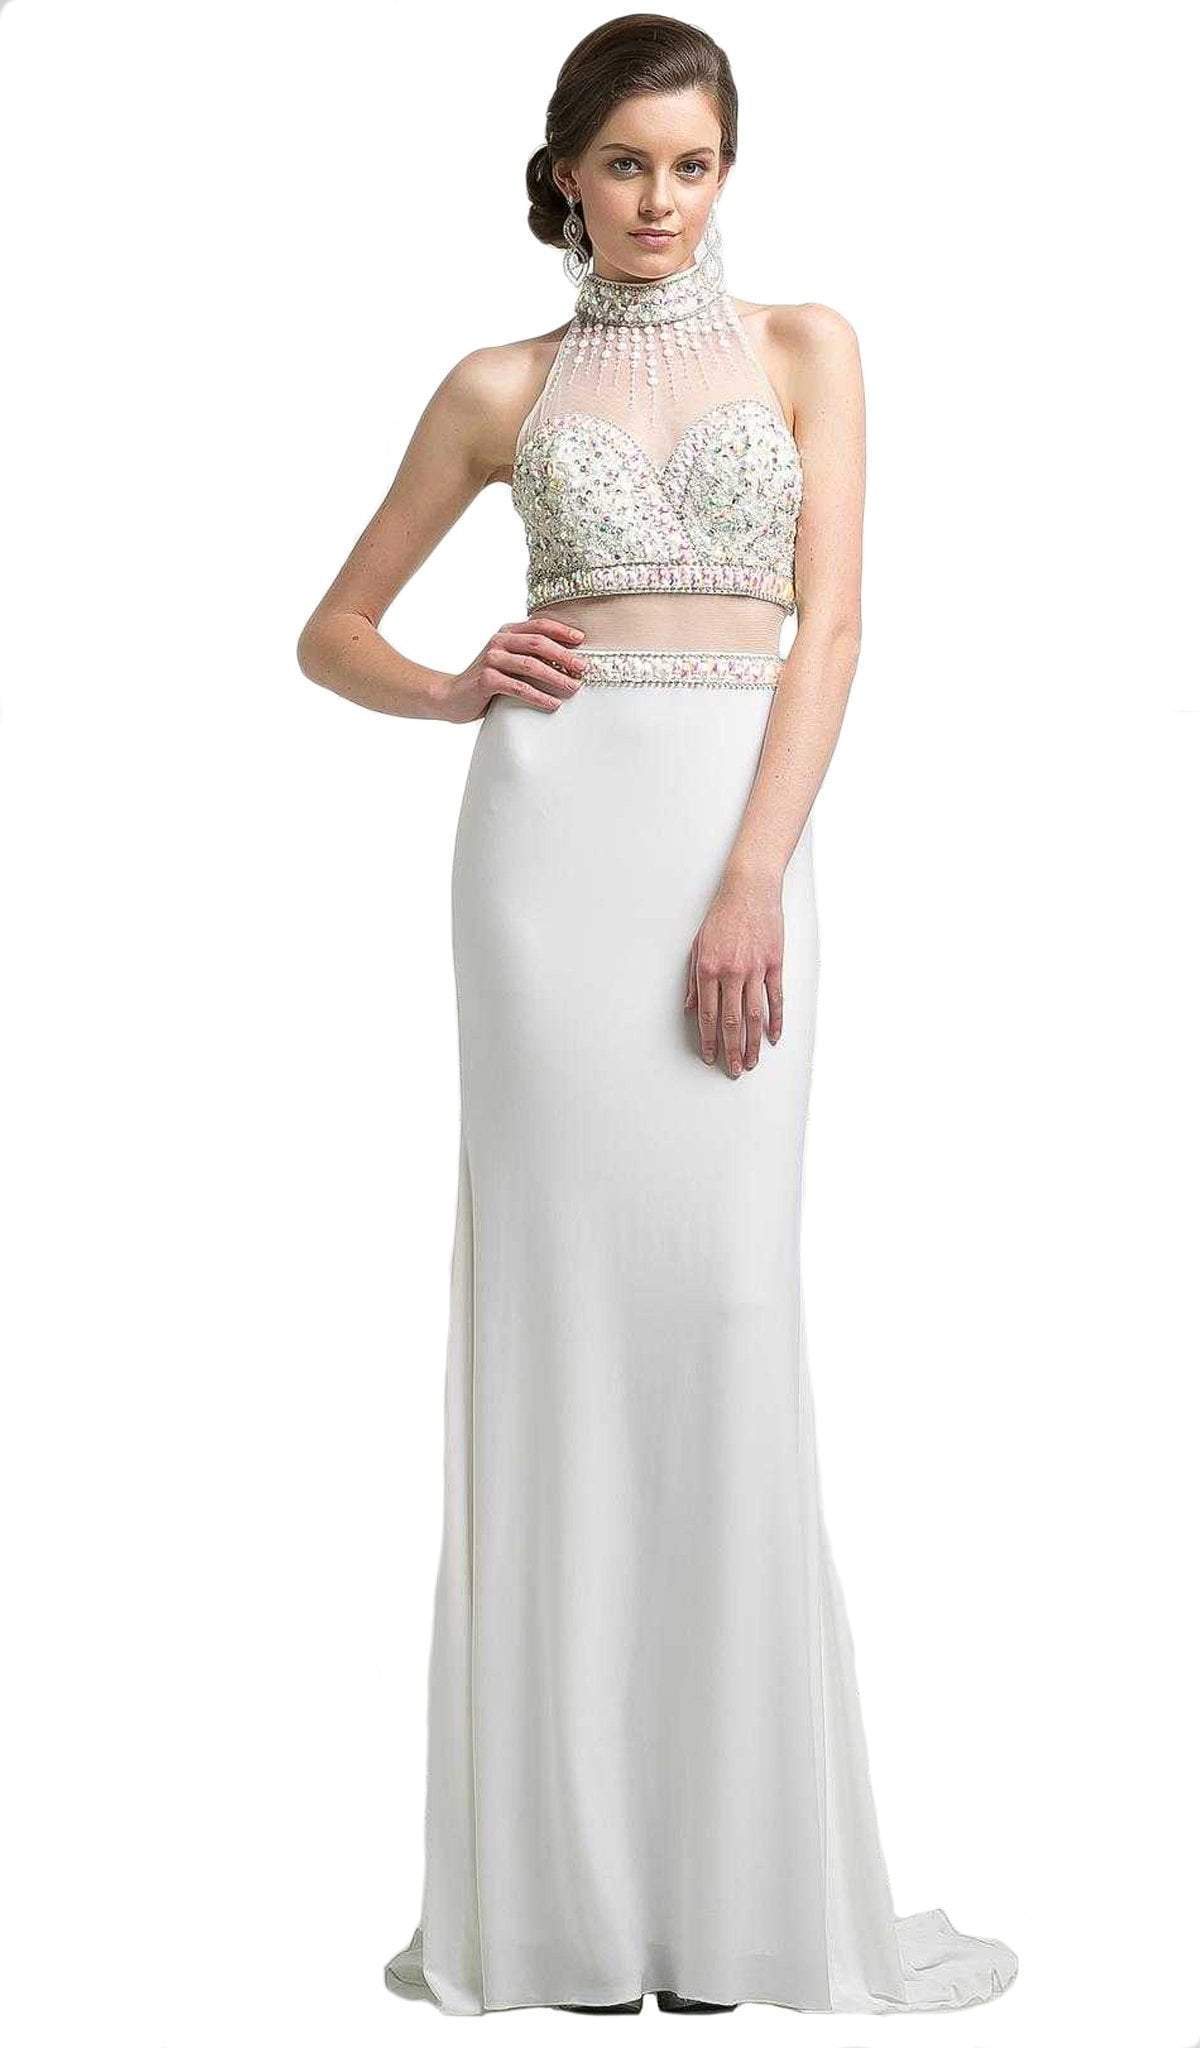 Cinderella Divine - Beaded High Neck Faux Two-Piece Sheath Evening Gown
